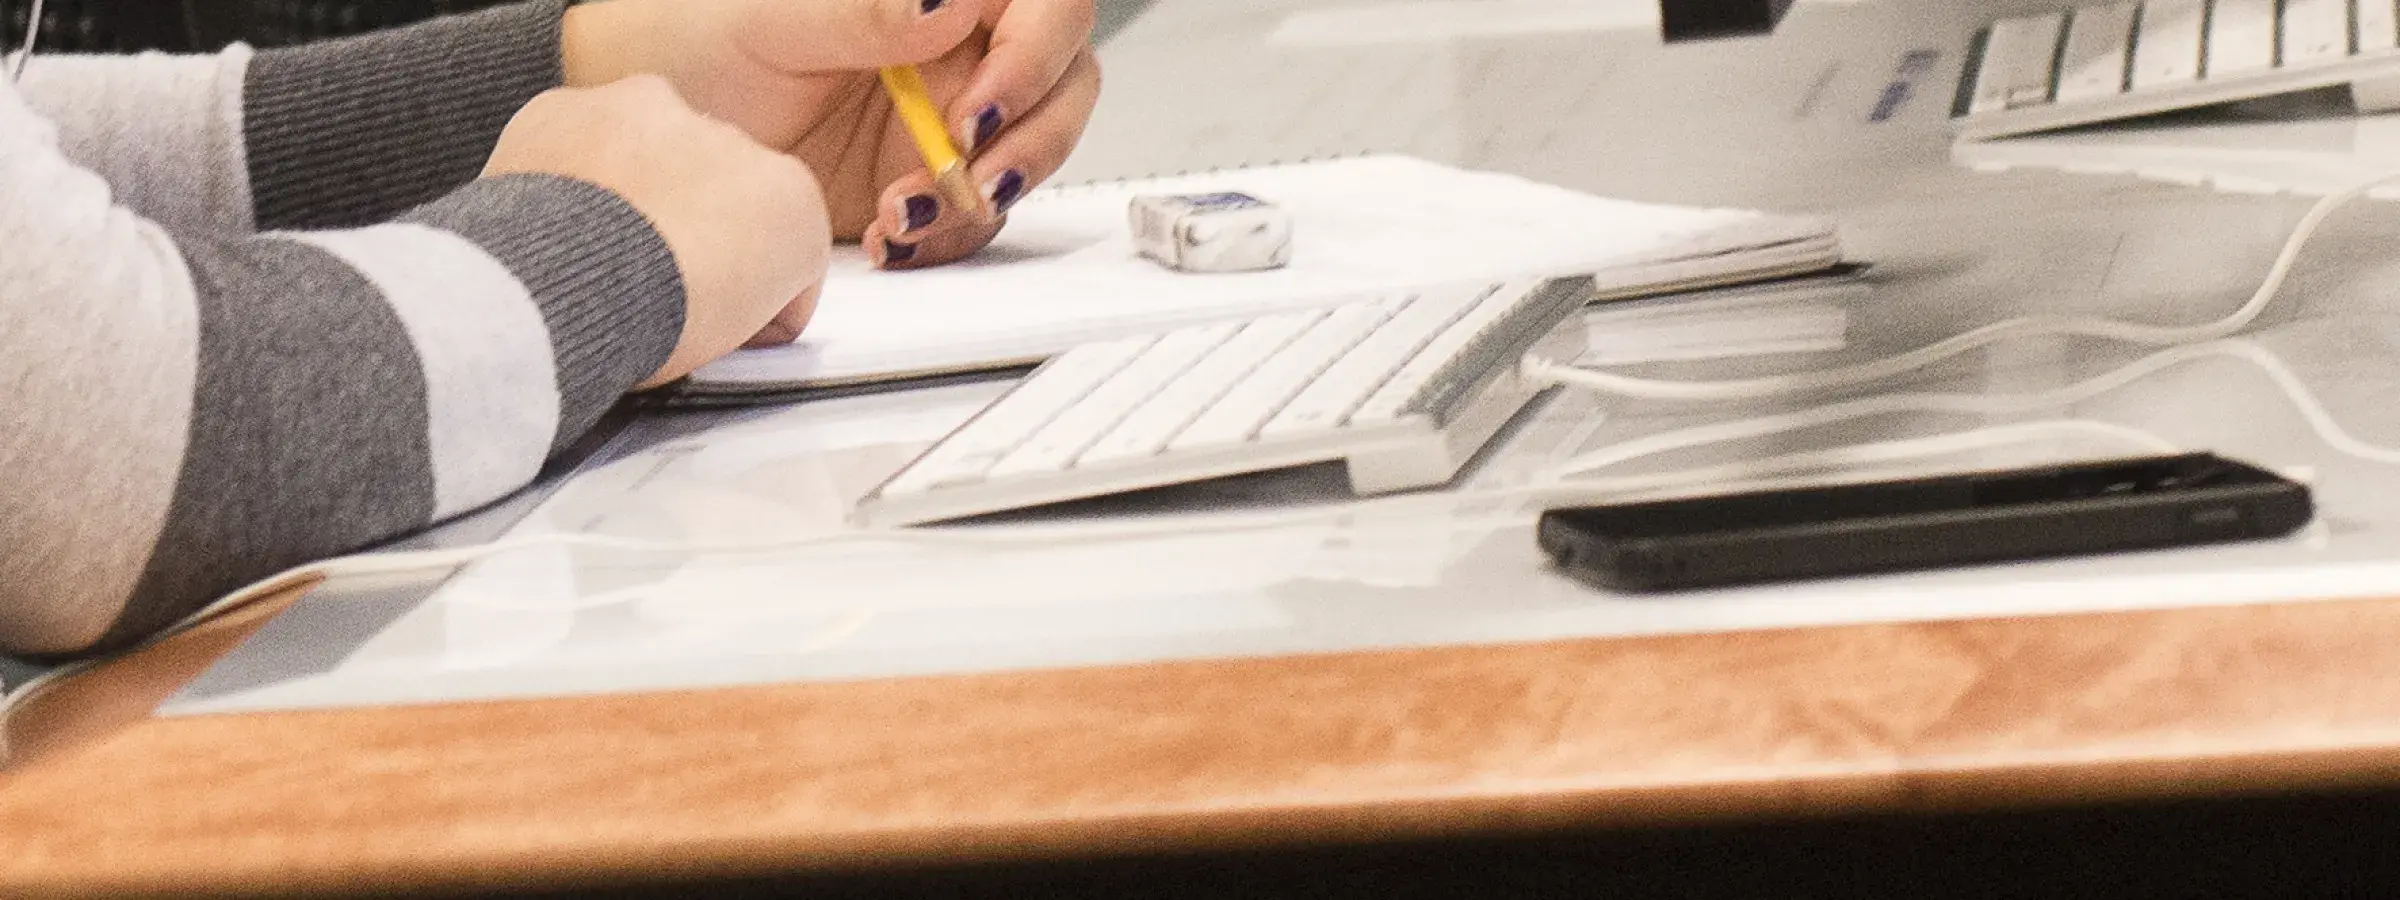 person holding a writing implement using a notepad, sitting in front of a computer 